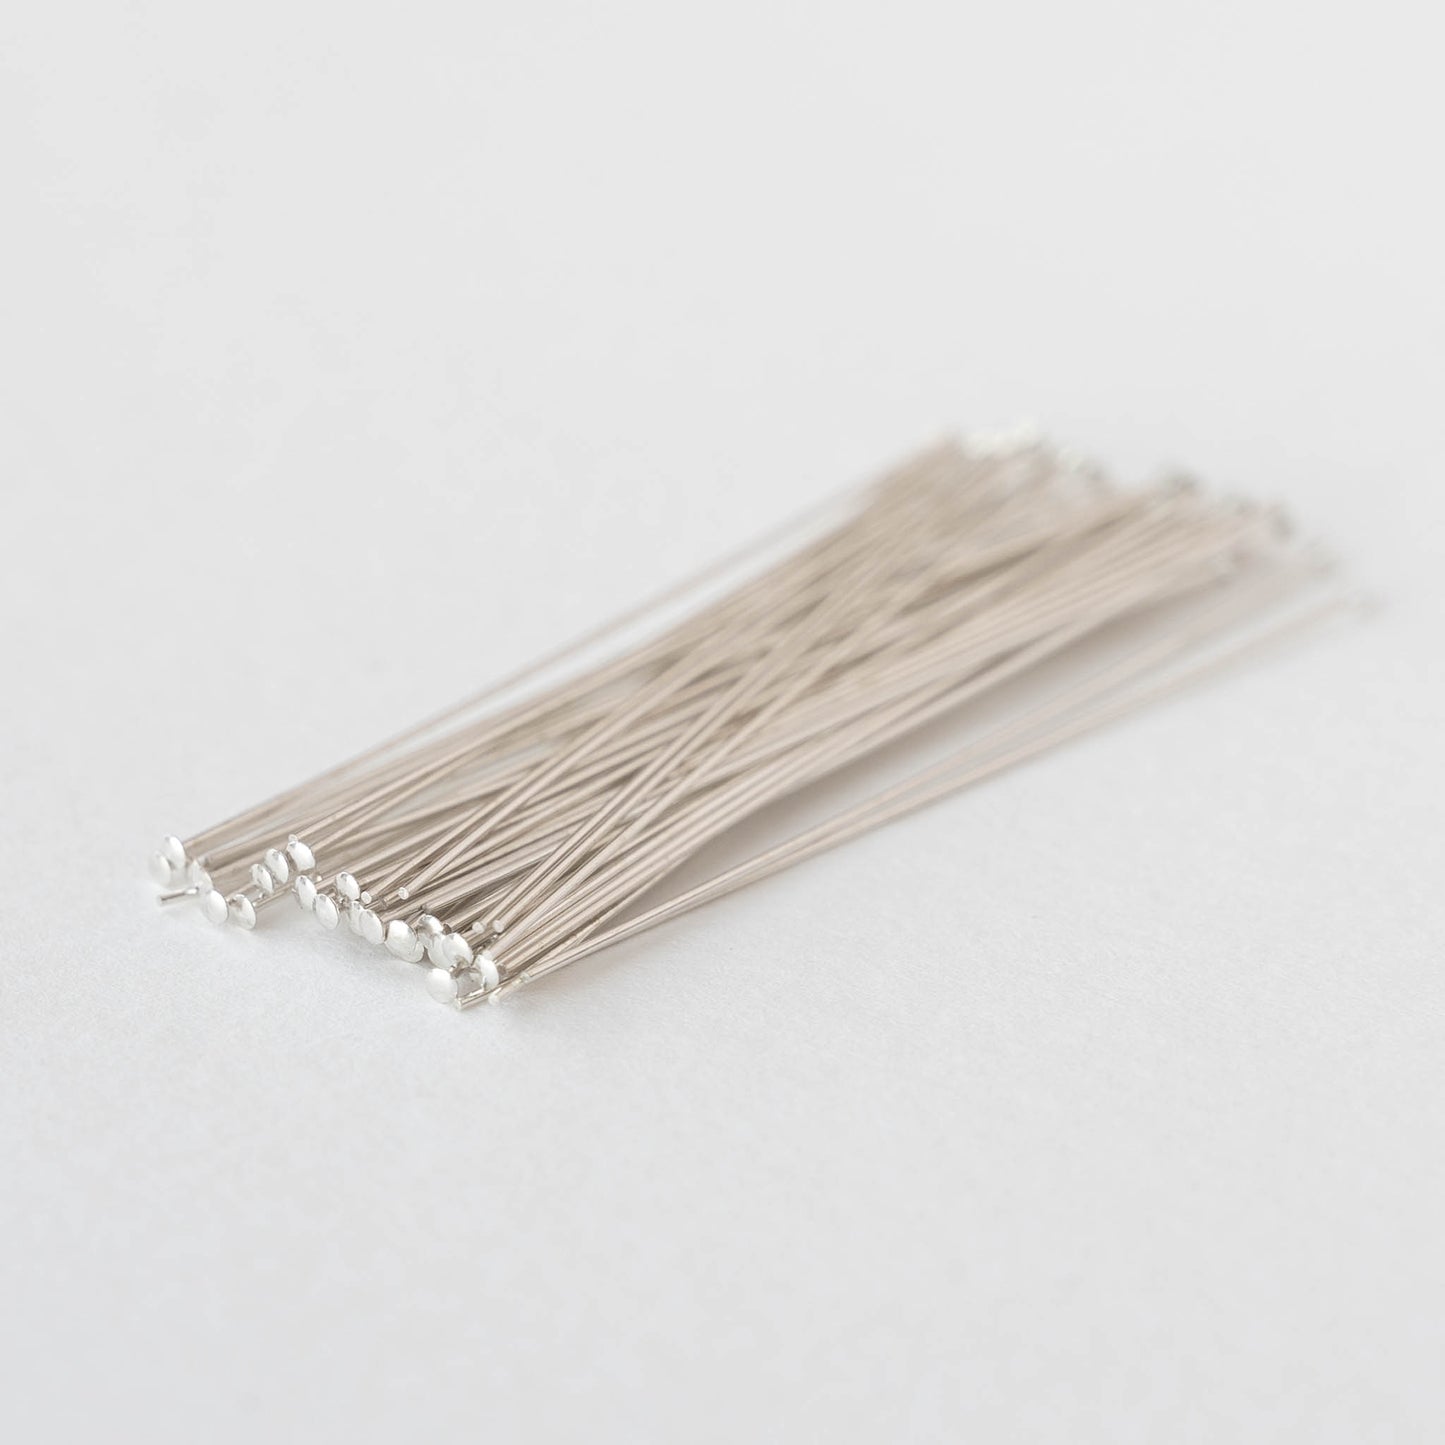 2 Inch Silver Filled Headpins - 10 pieces